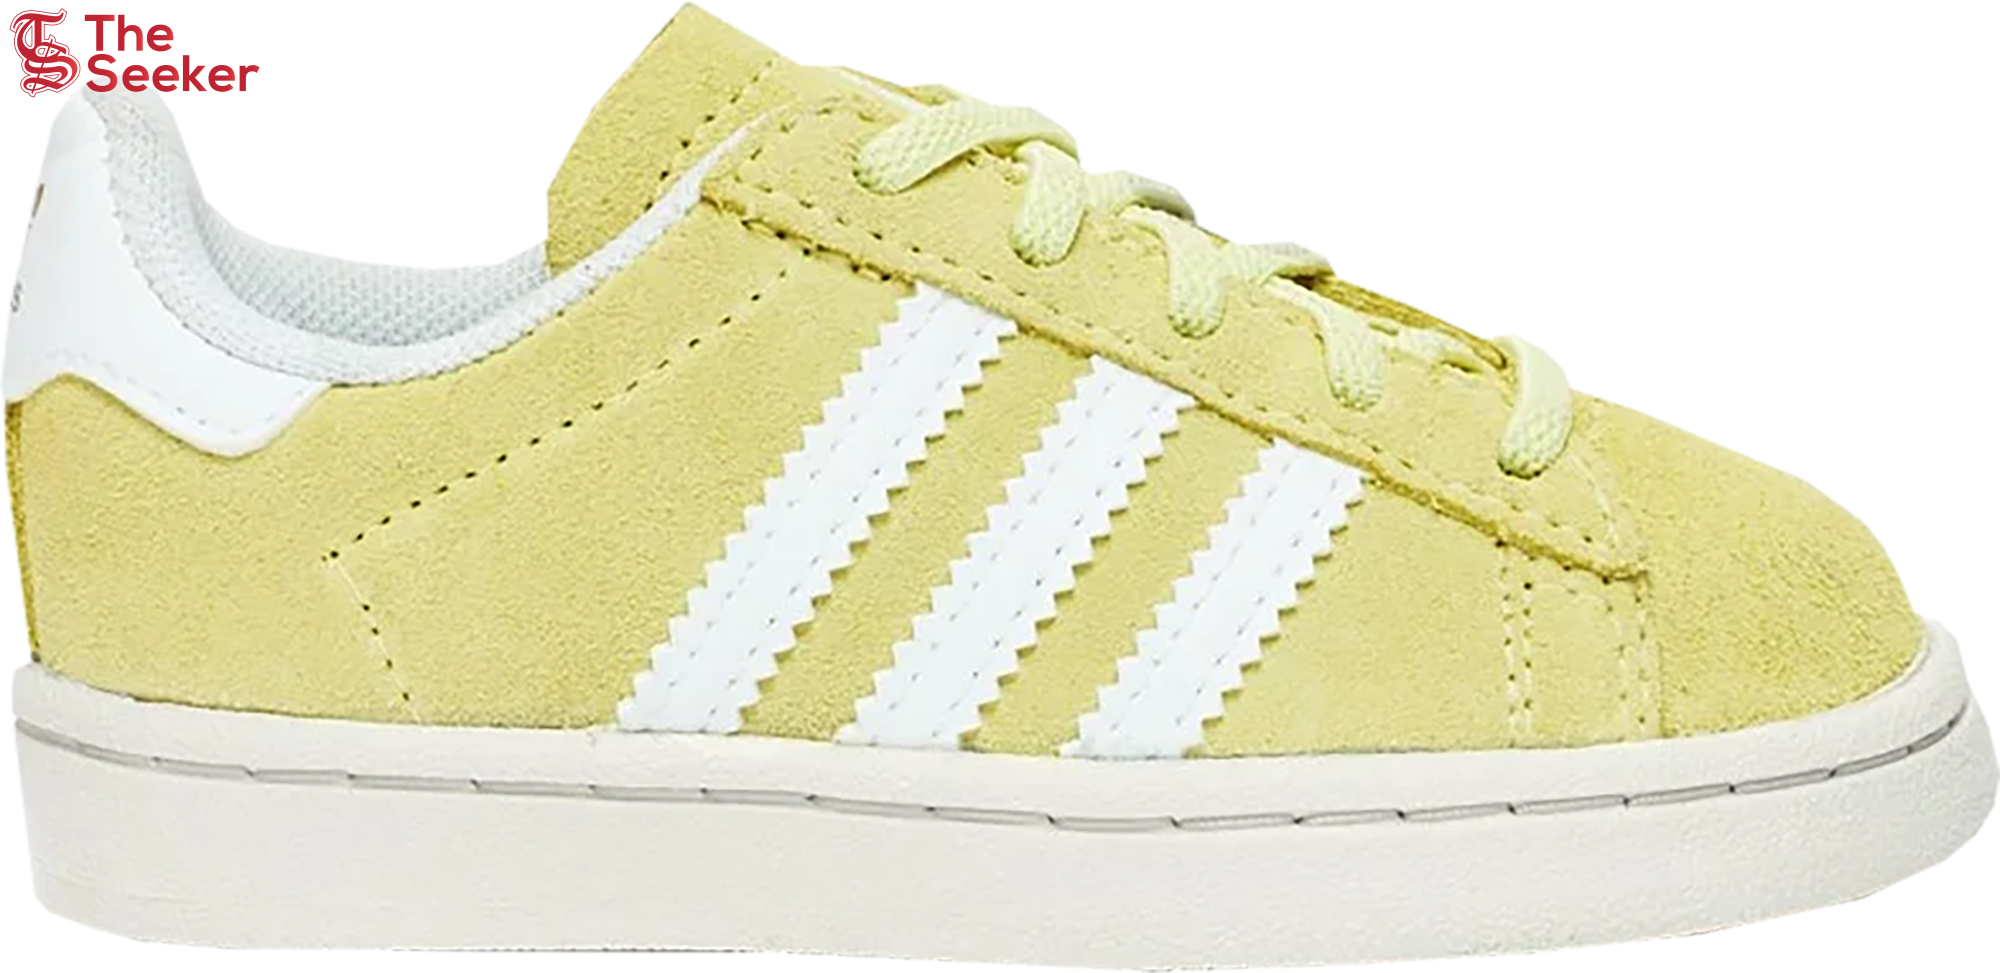 adidas Campus Homemade Pack Yellow (TD)